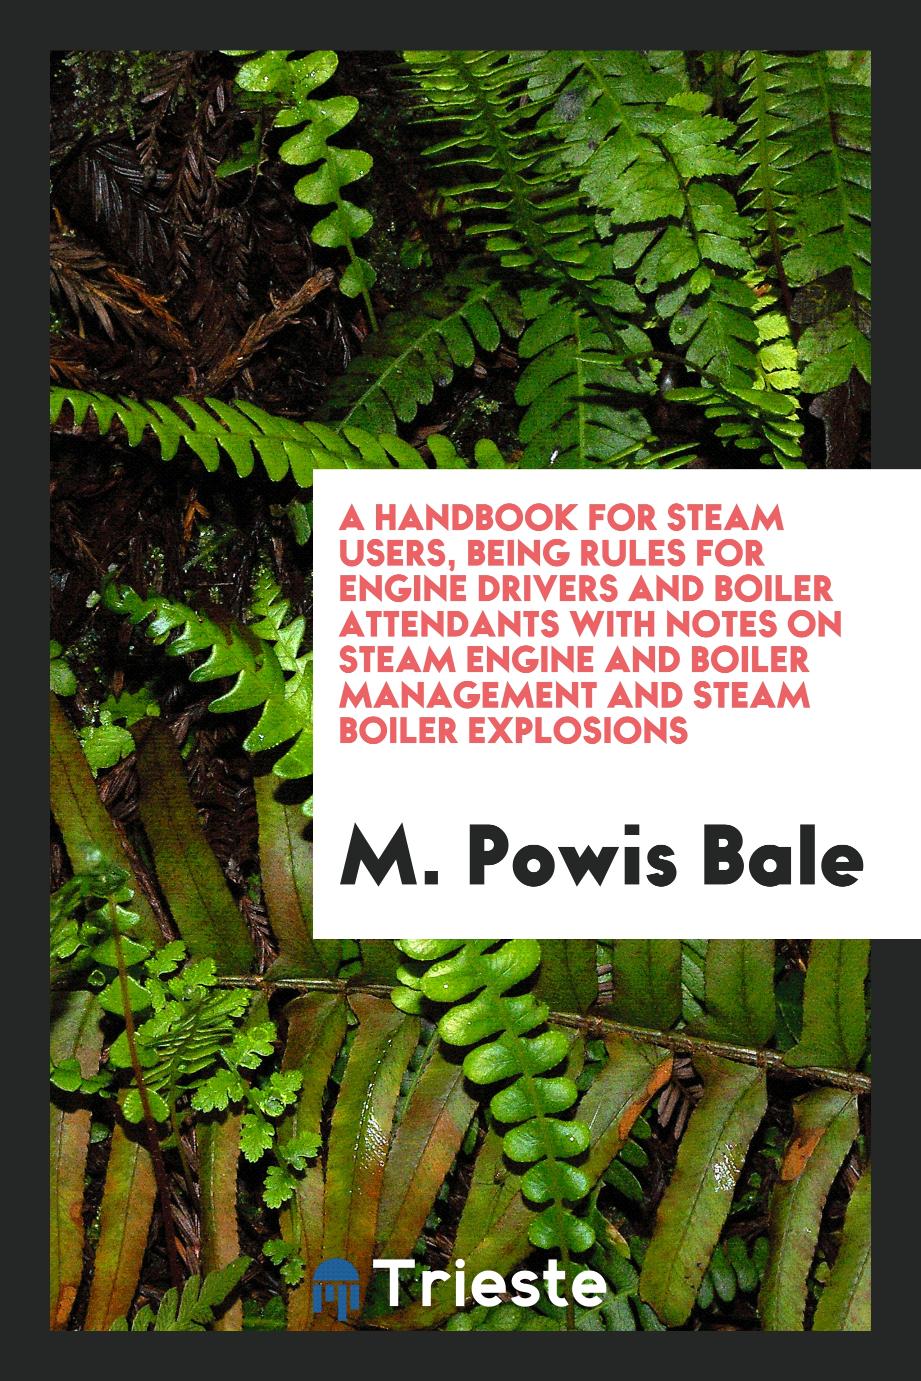 A Handbook for Steam Users, Being Rules for Engine Drivers and Boiler Attendants with Notes on Steam Engine and Boiler Management and Steam Boiler Explosions